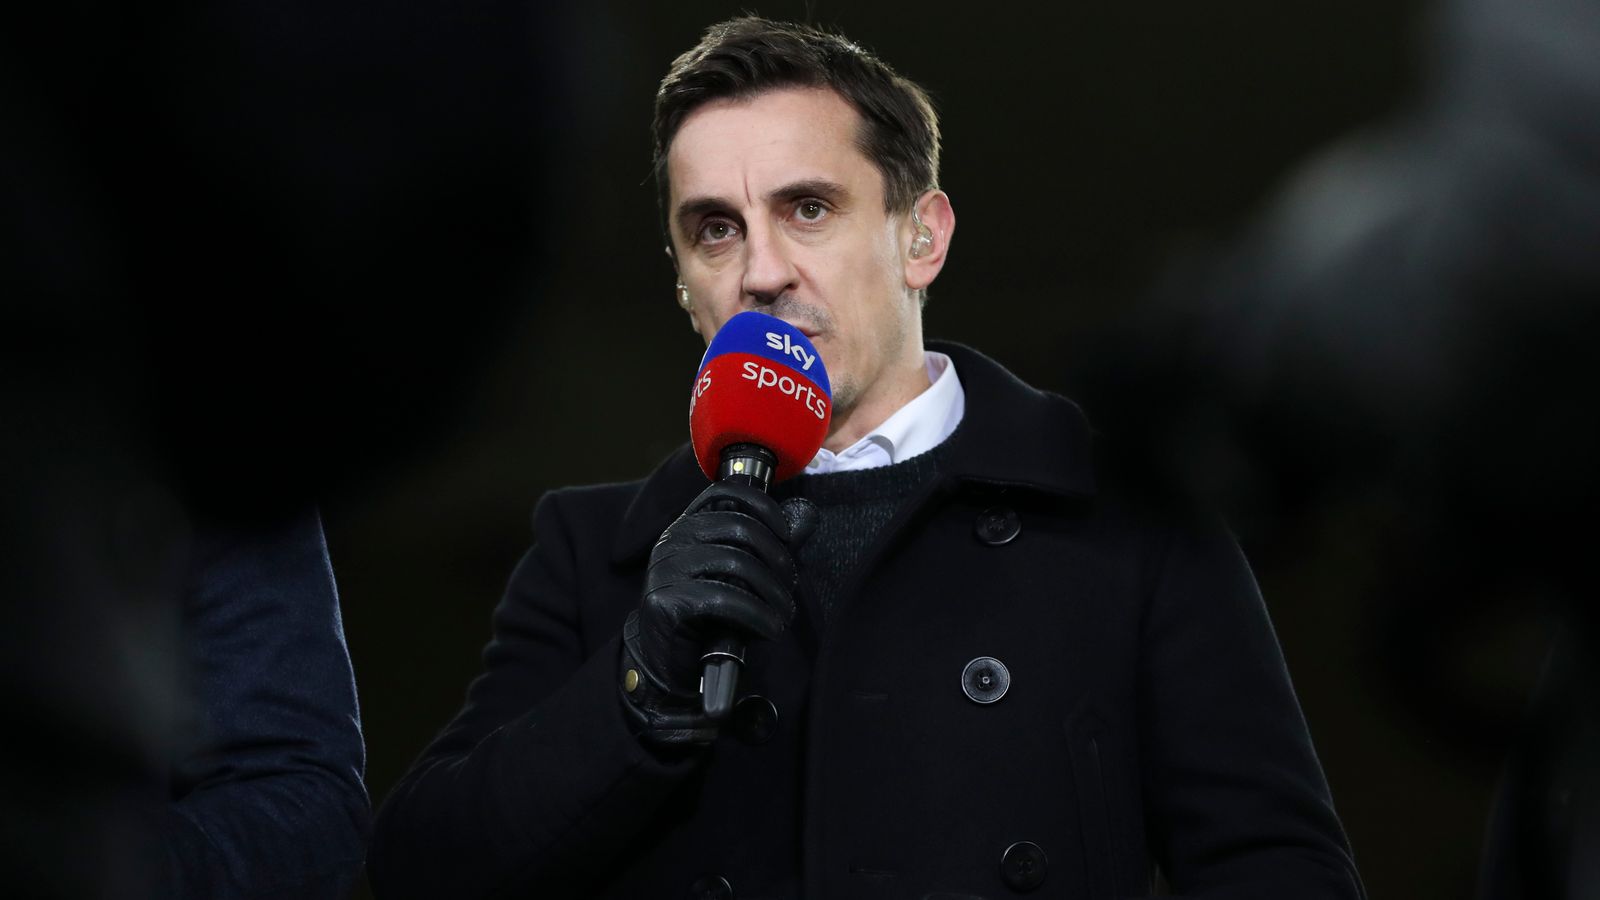 Gary Neville: Man United can be ‘reset’ by Glazer family